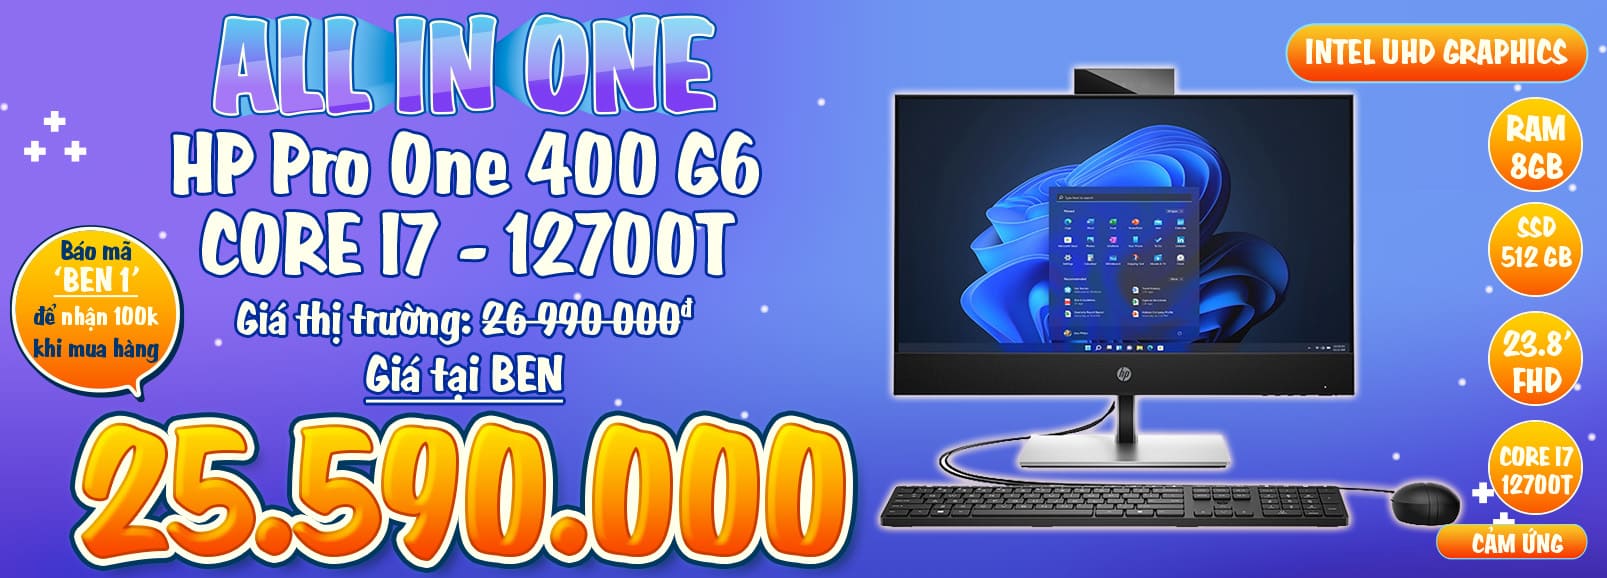 1607x578 banner HP Pro One 400 G6 i7 1